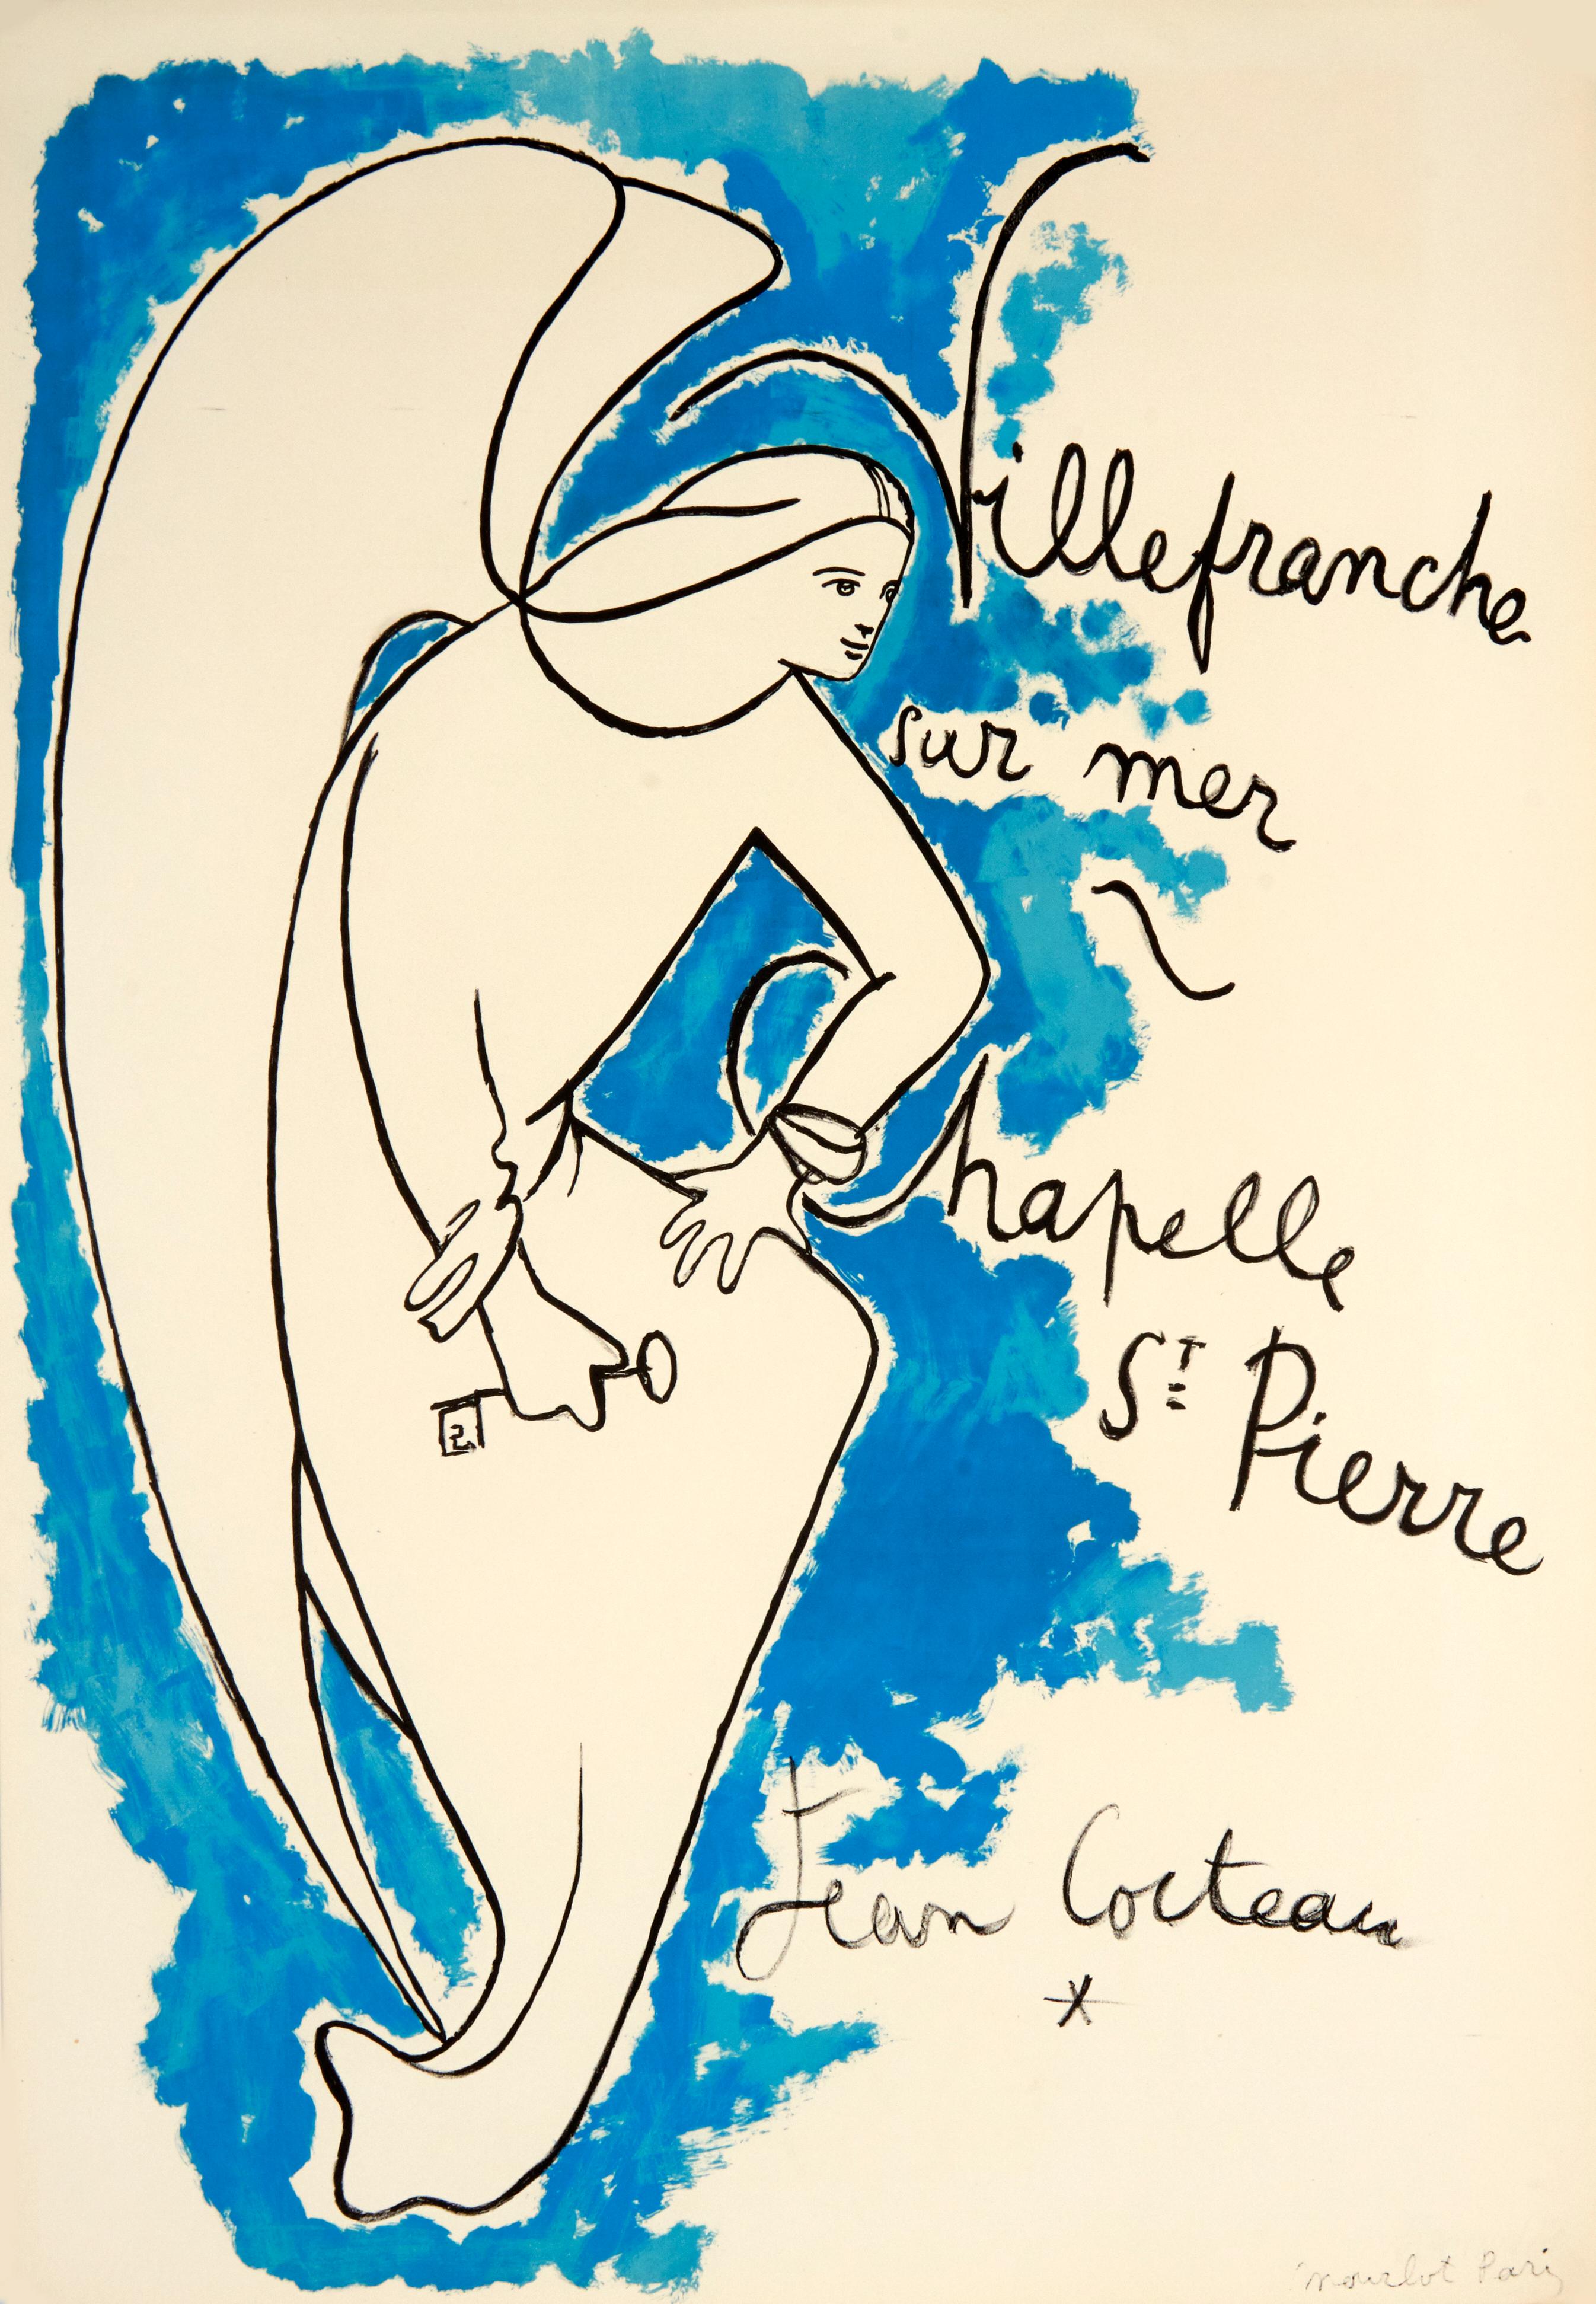 Artist: Jean Cocteau

Medium: Original Lithographic Poster, 1957

Dimensions: 29.5 x 20.5 in, 74.9 x 52.07 cm

Arches Paper - Excellent Condition A

This iconic and original lithographic poster was created by Jean Cocteau to celebrate the Chapelle